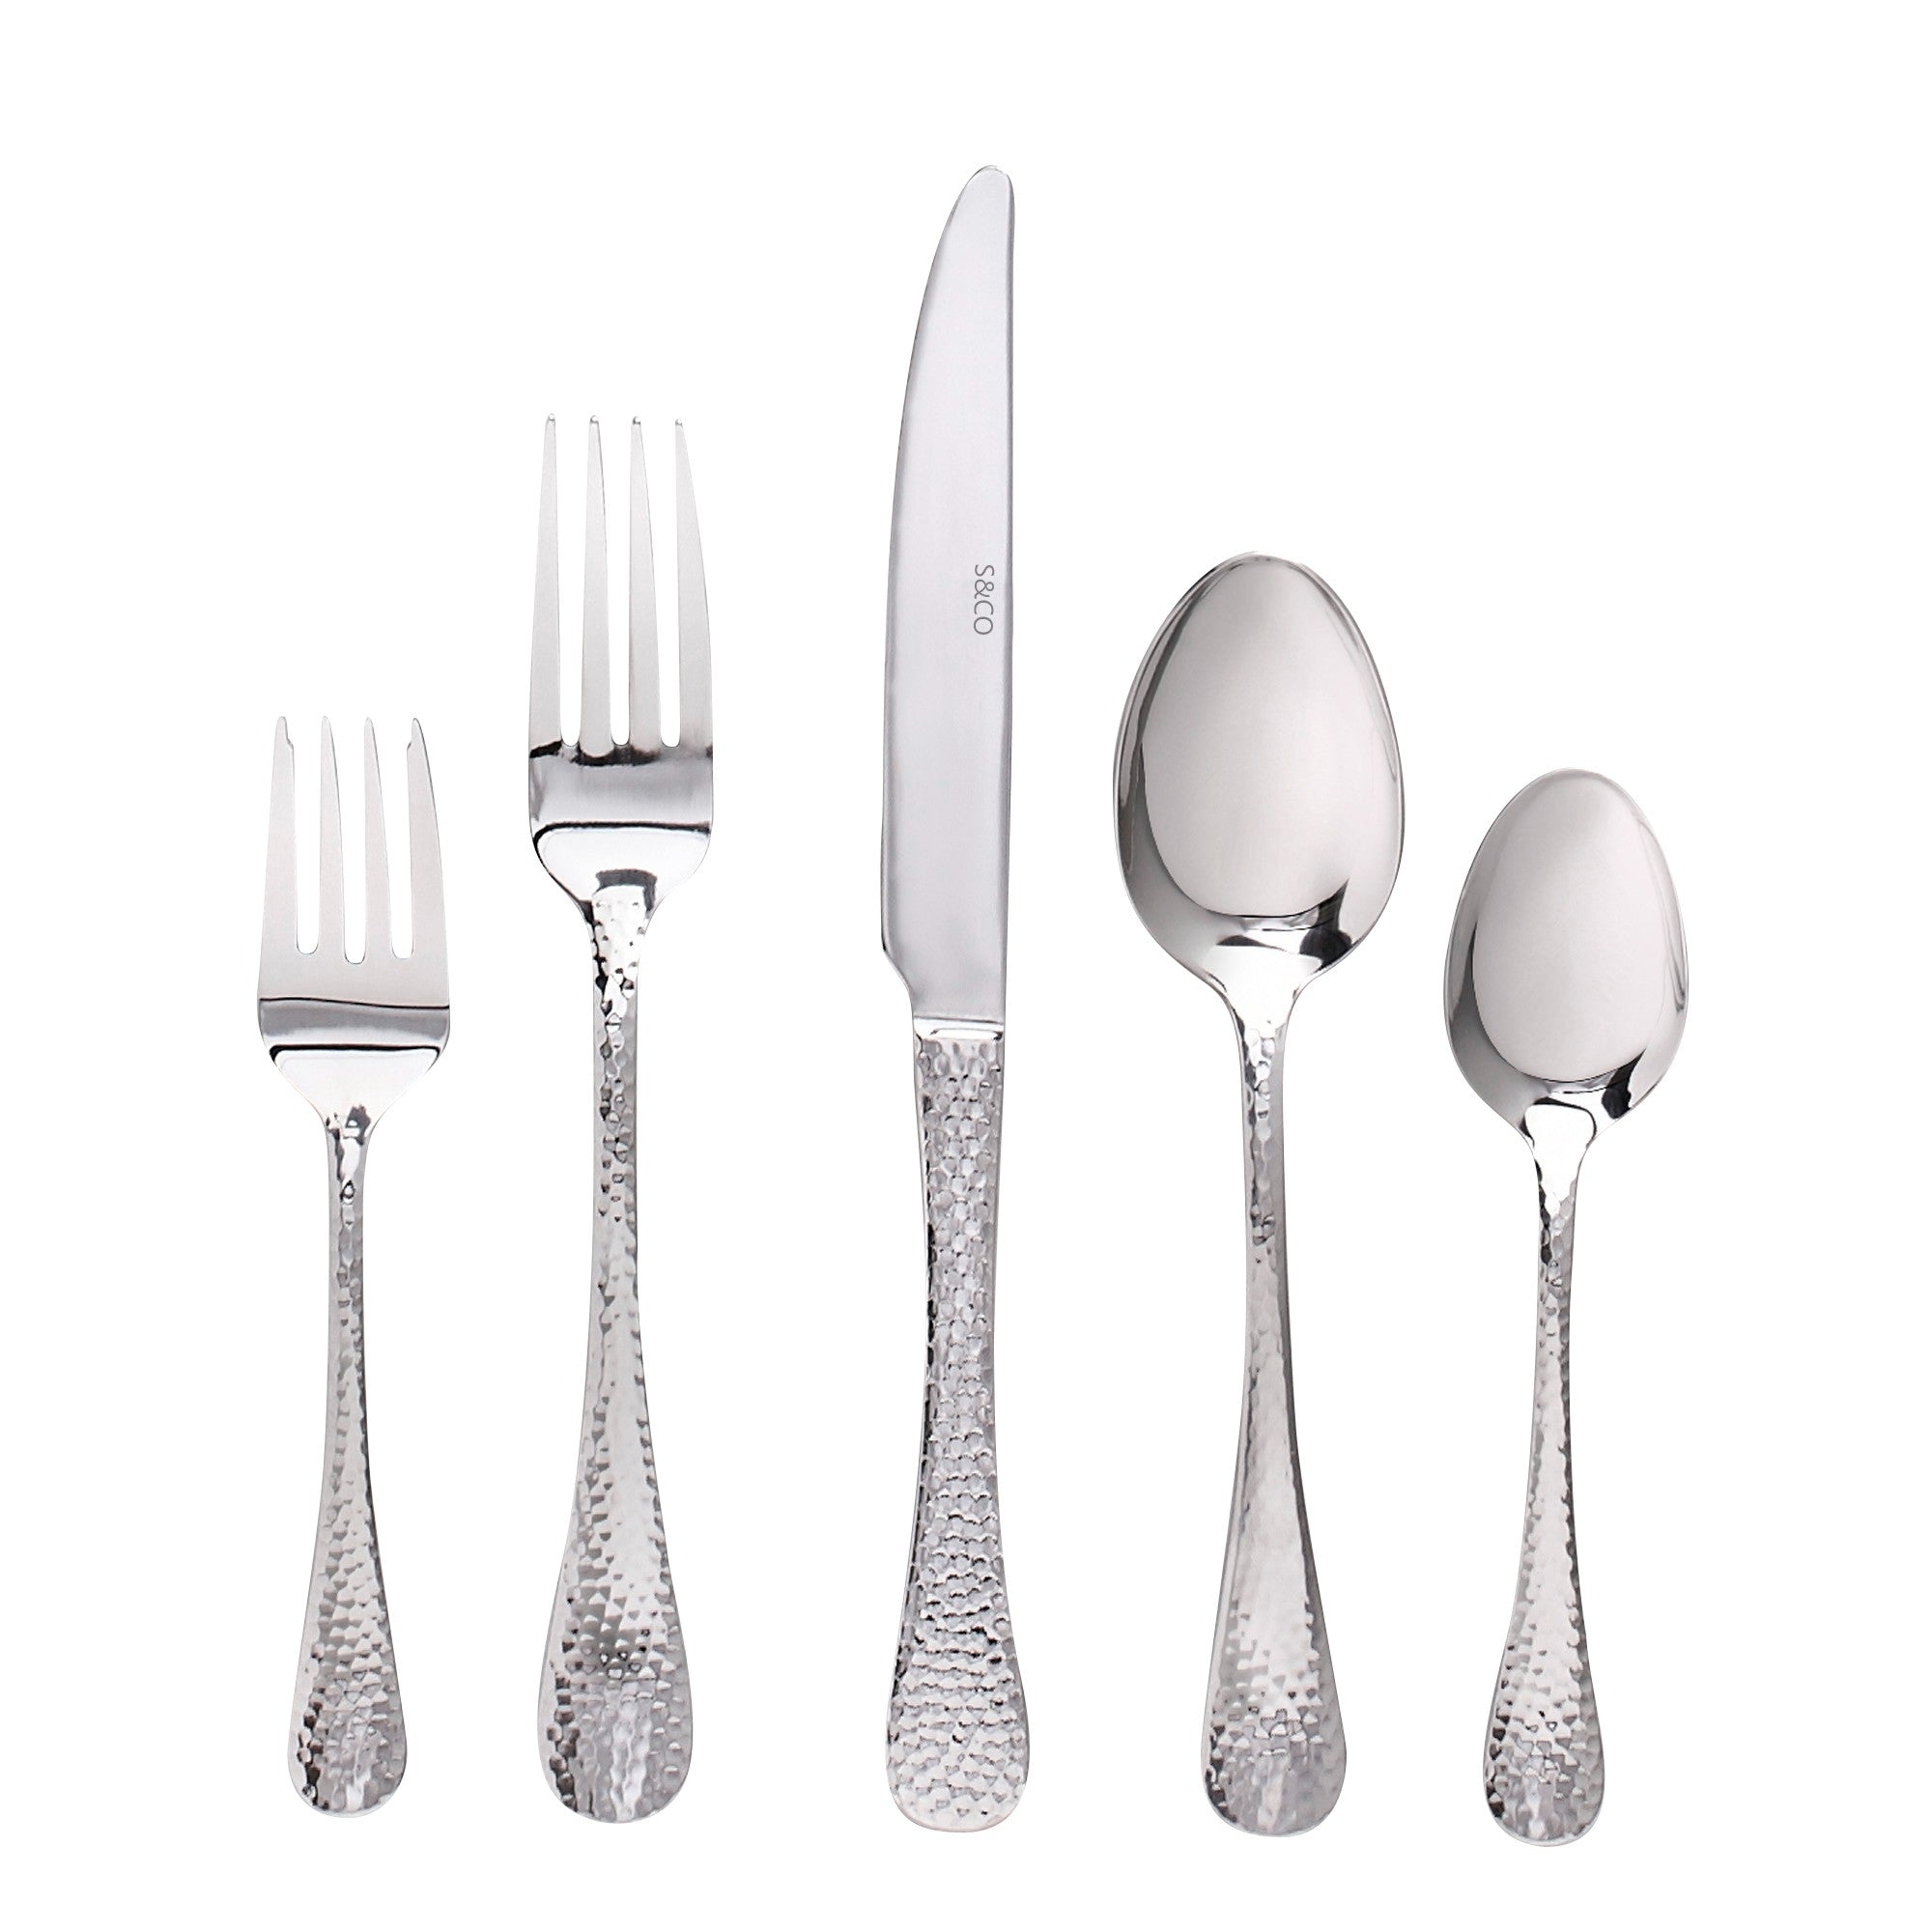 title:Safdie & Co. Flatware Stainless Steel 20PC Set Chicago;color:Silver